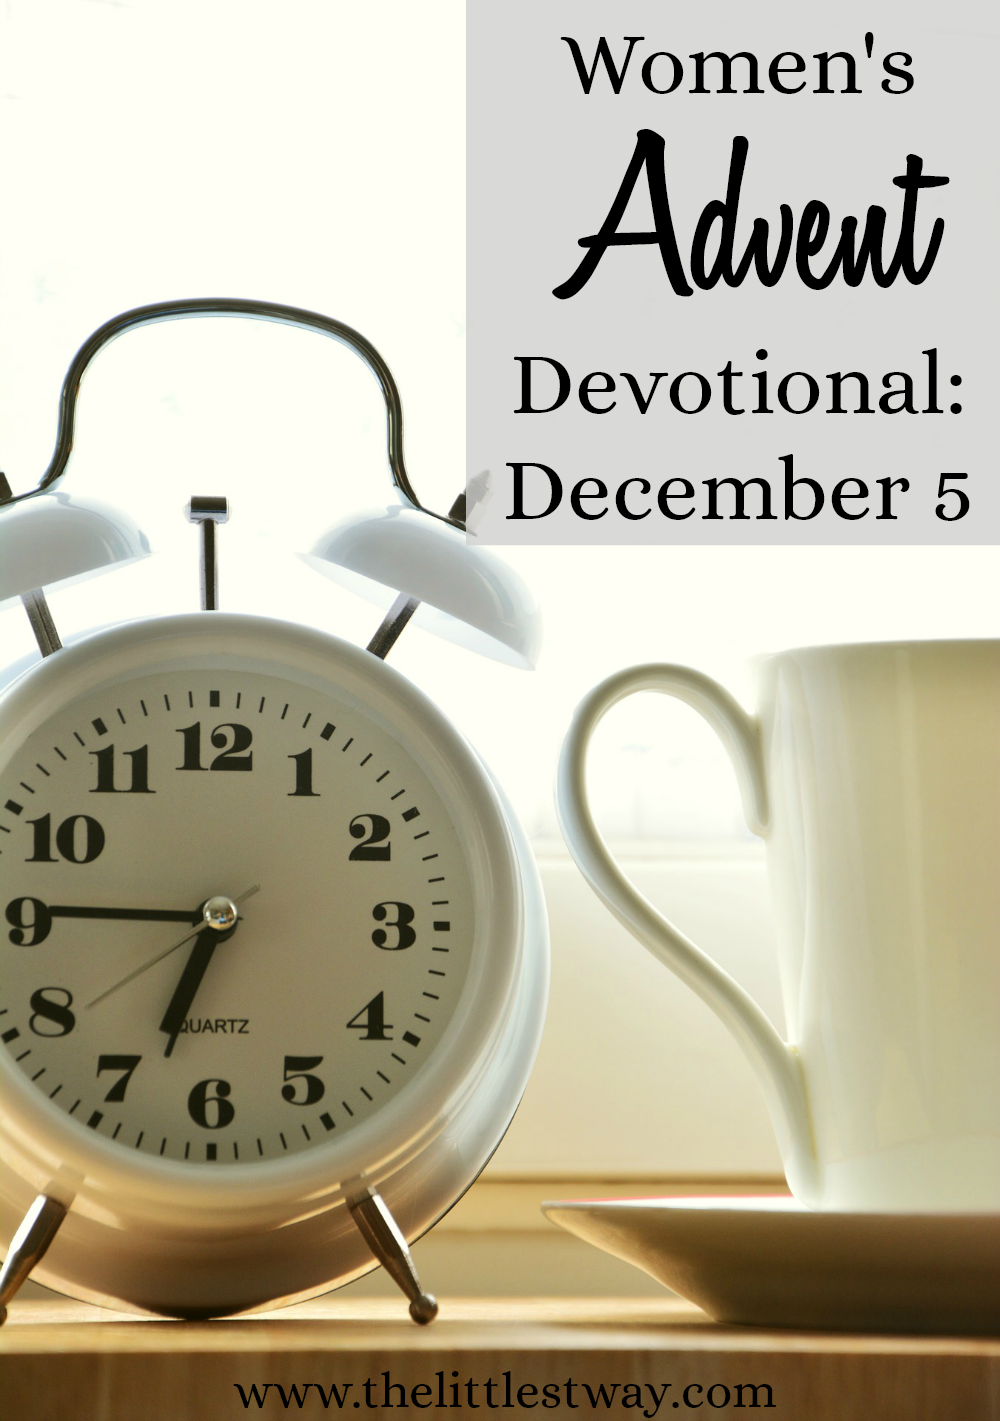 A Women's Advent Devotional that is simple, short, and to the point...but spiritually rich and soul-satisfying deep.